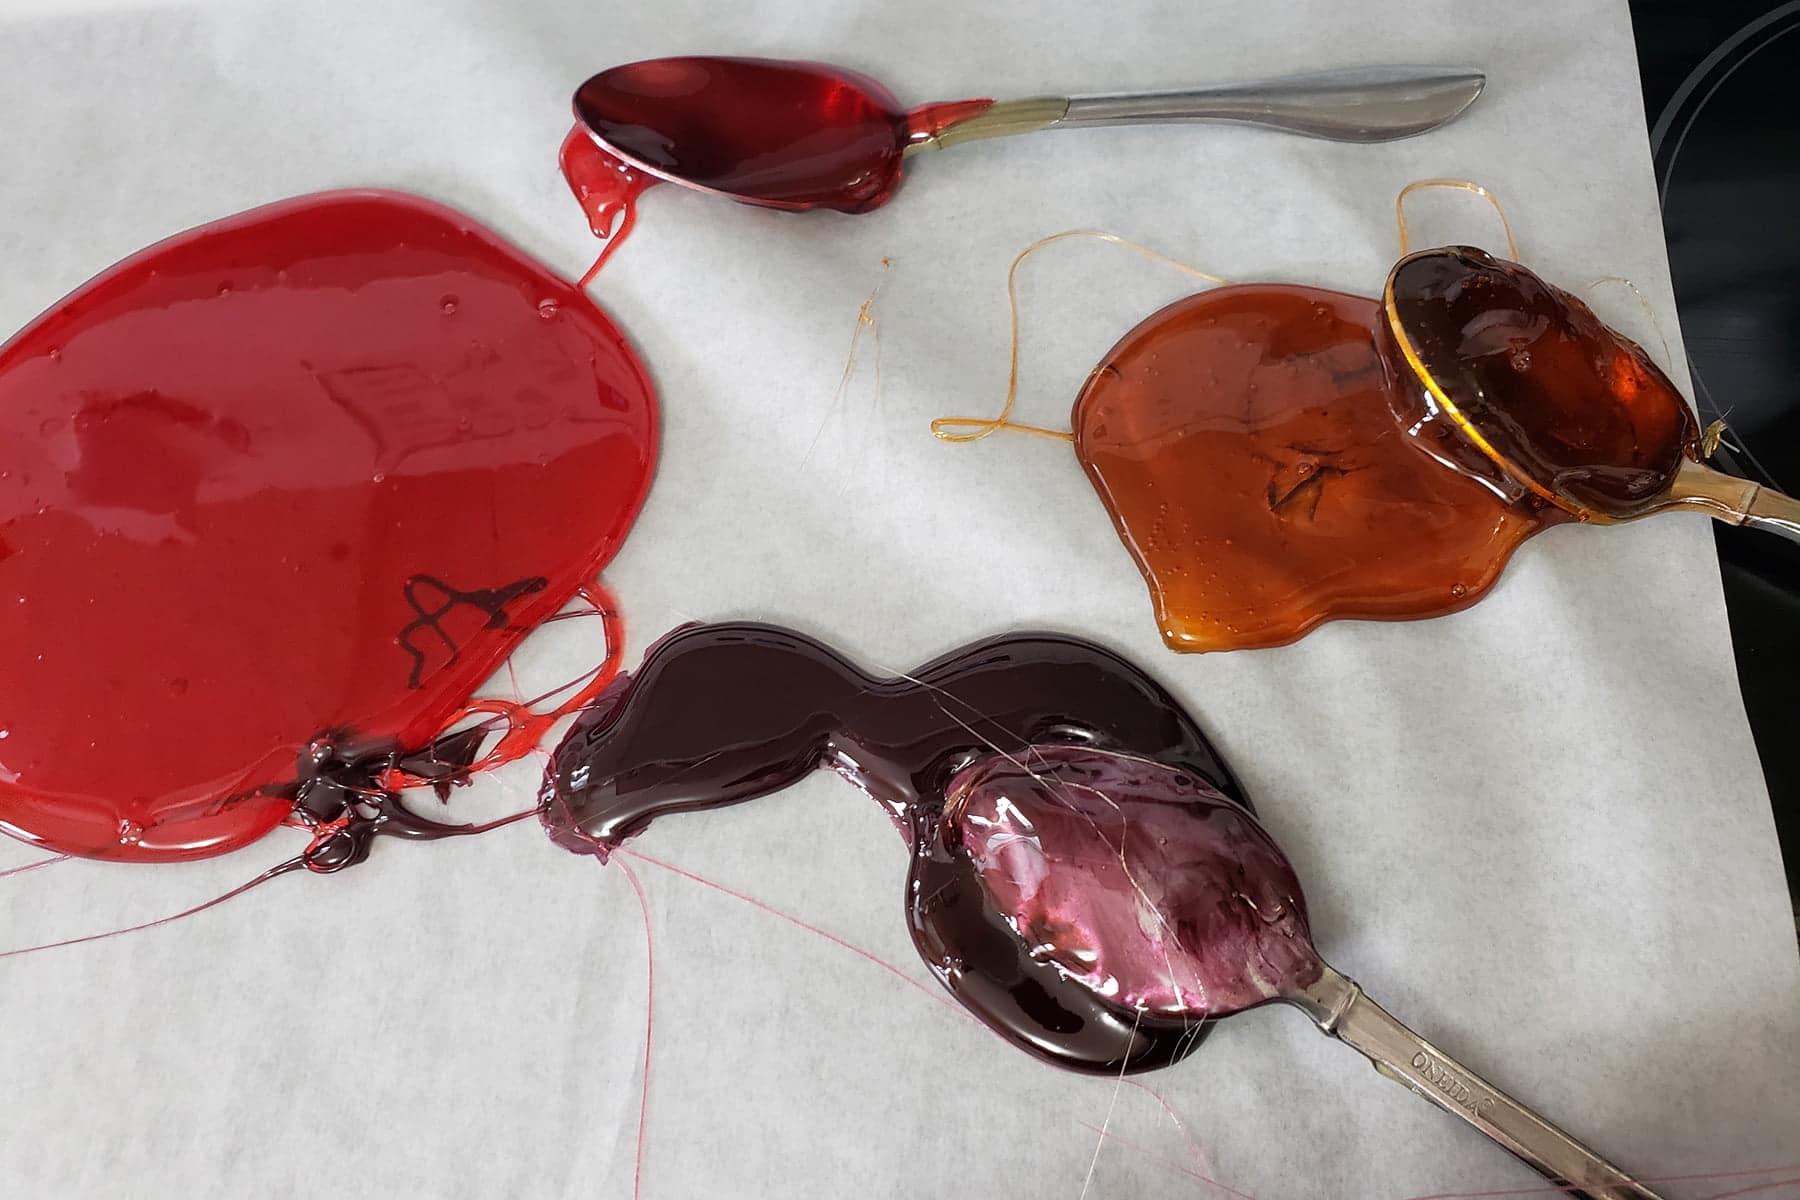 3 blobs of hard candy are shown on parchment paper, along with candy coated spoons.